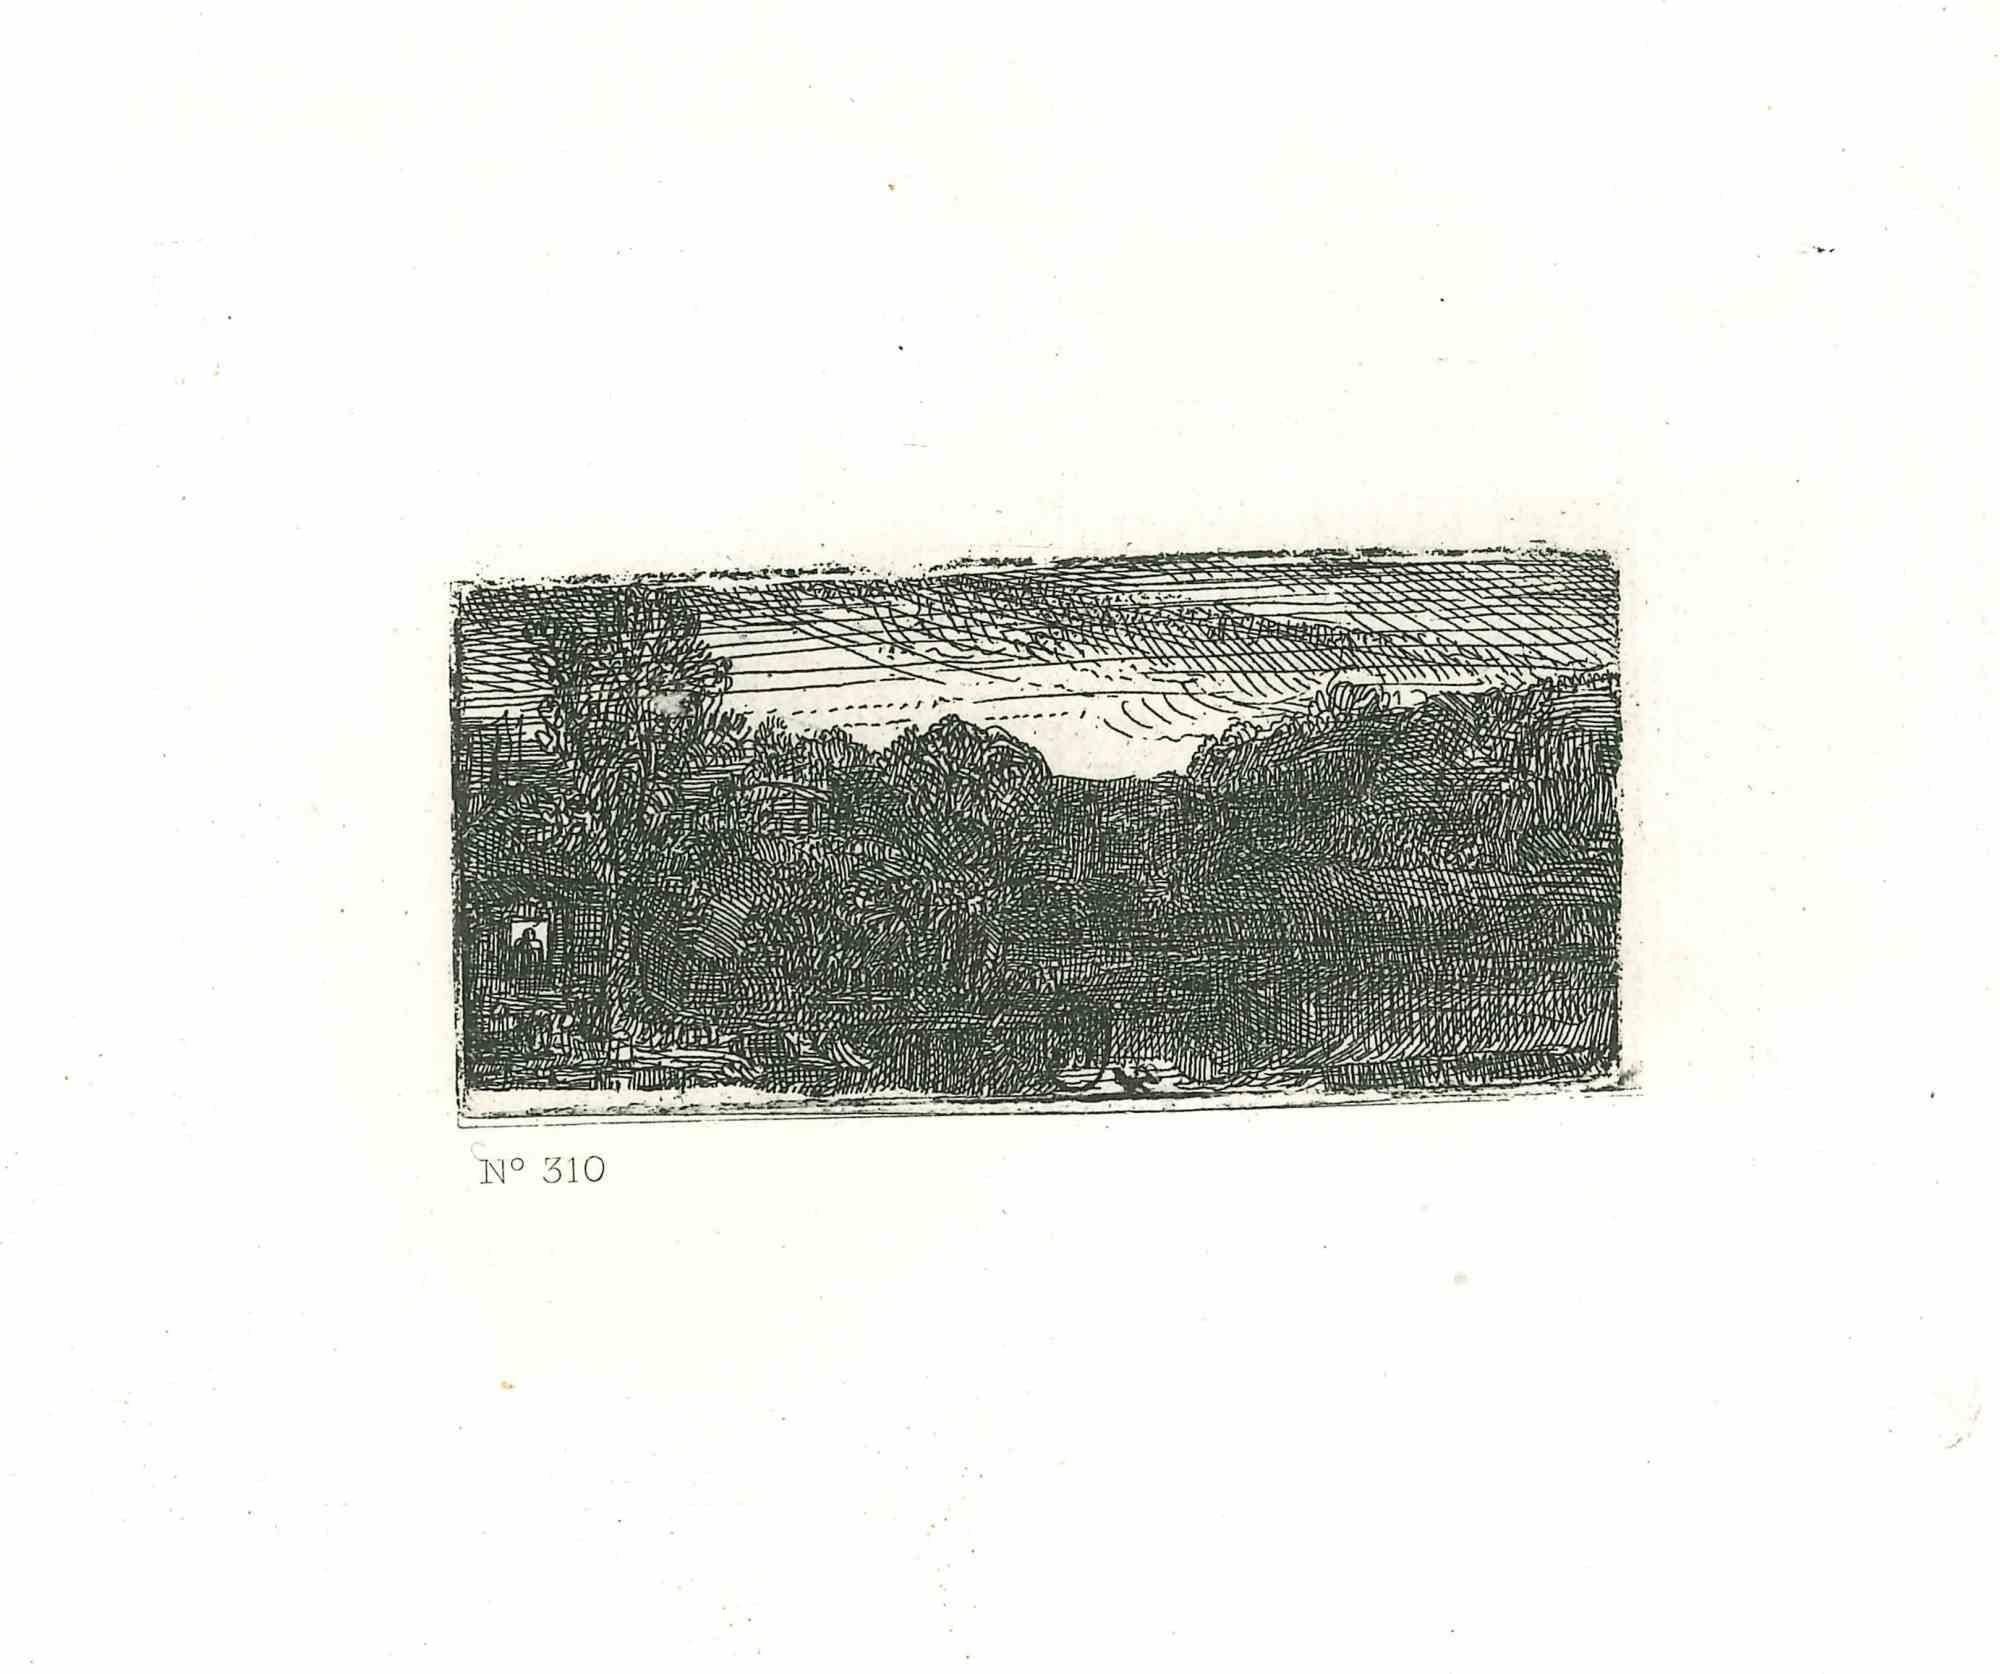 Charles Amand Durand Figurative Print - Small Gray Landscape - Engraving after Rembrandt - 19th Century